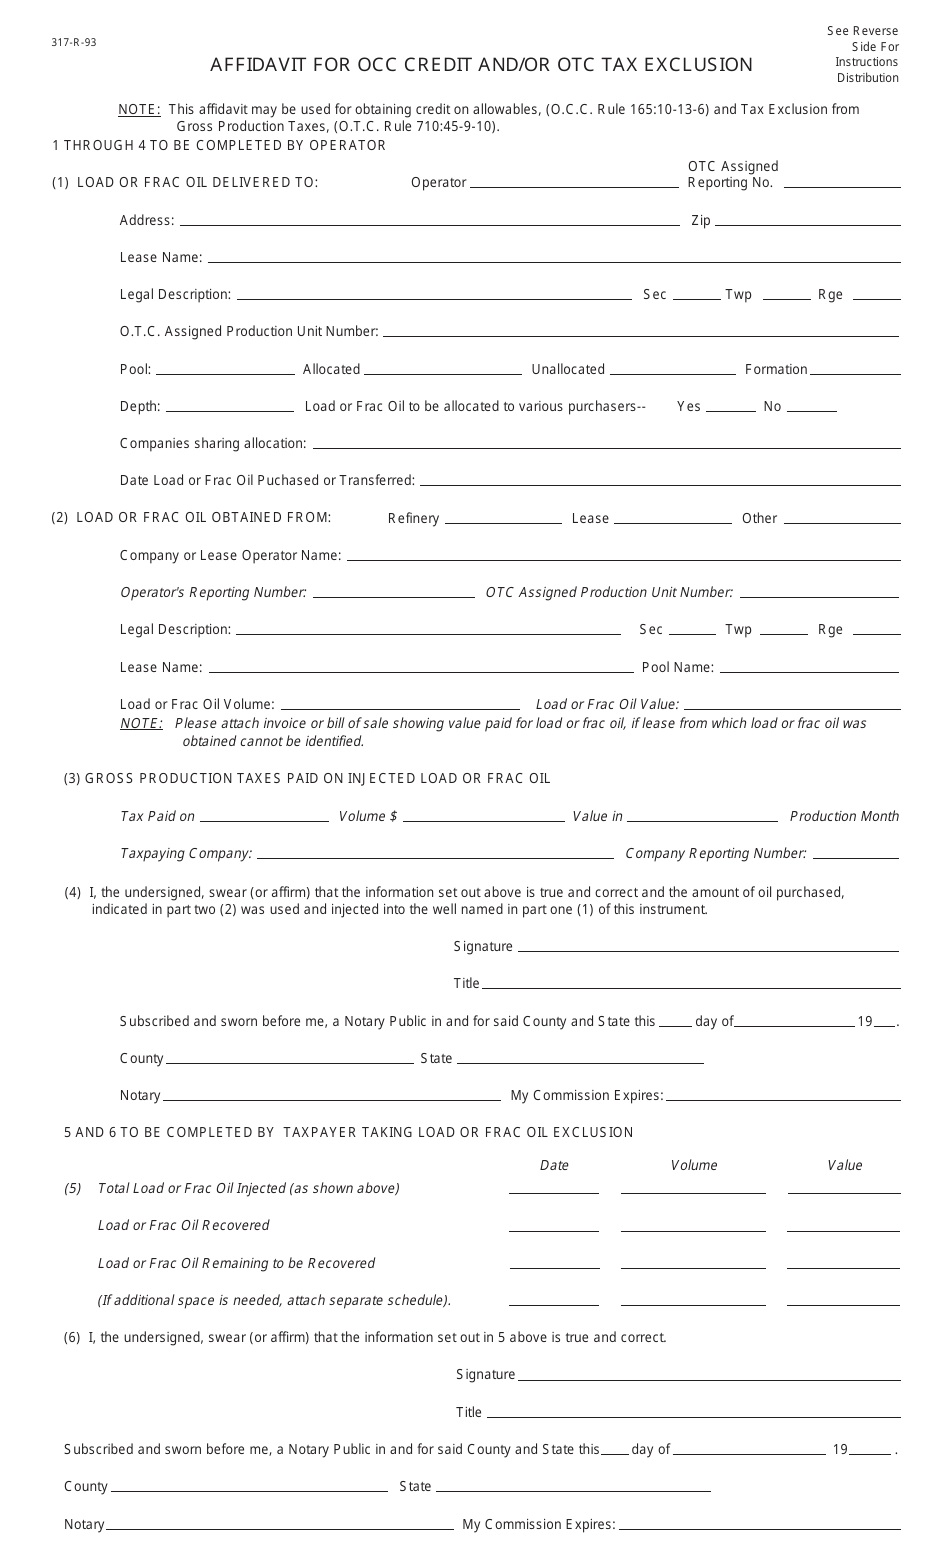 OTC Form 317-R-93 Affidavit for Occ Credit and / or OTC Tax Exclusion - Oklahoma, Page 1